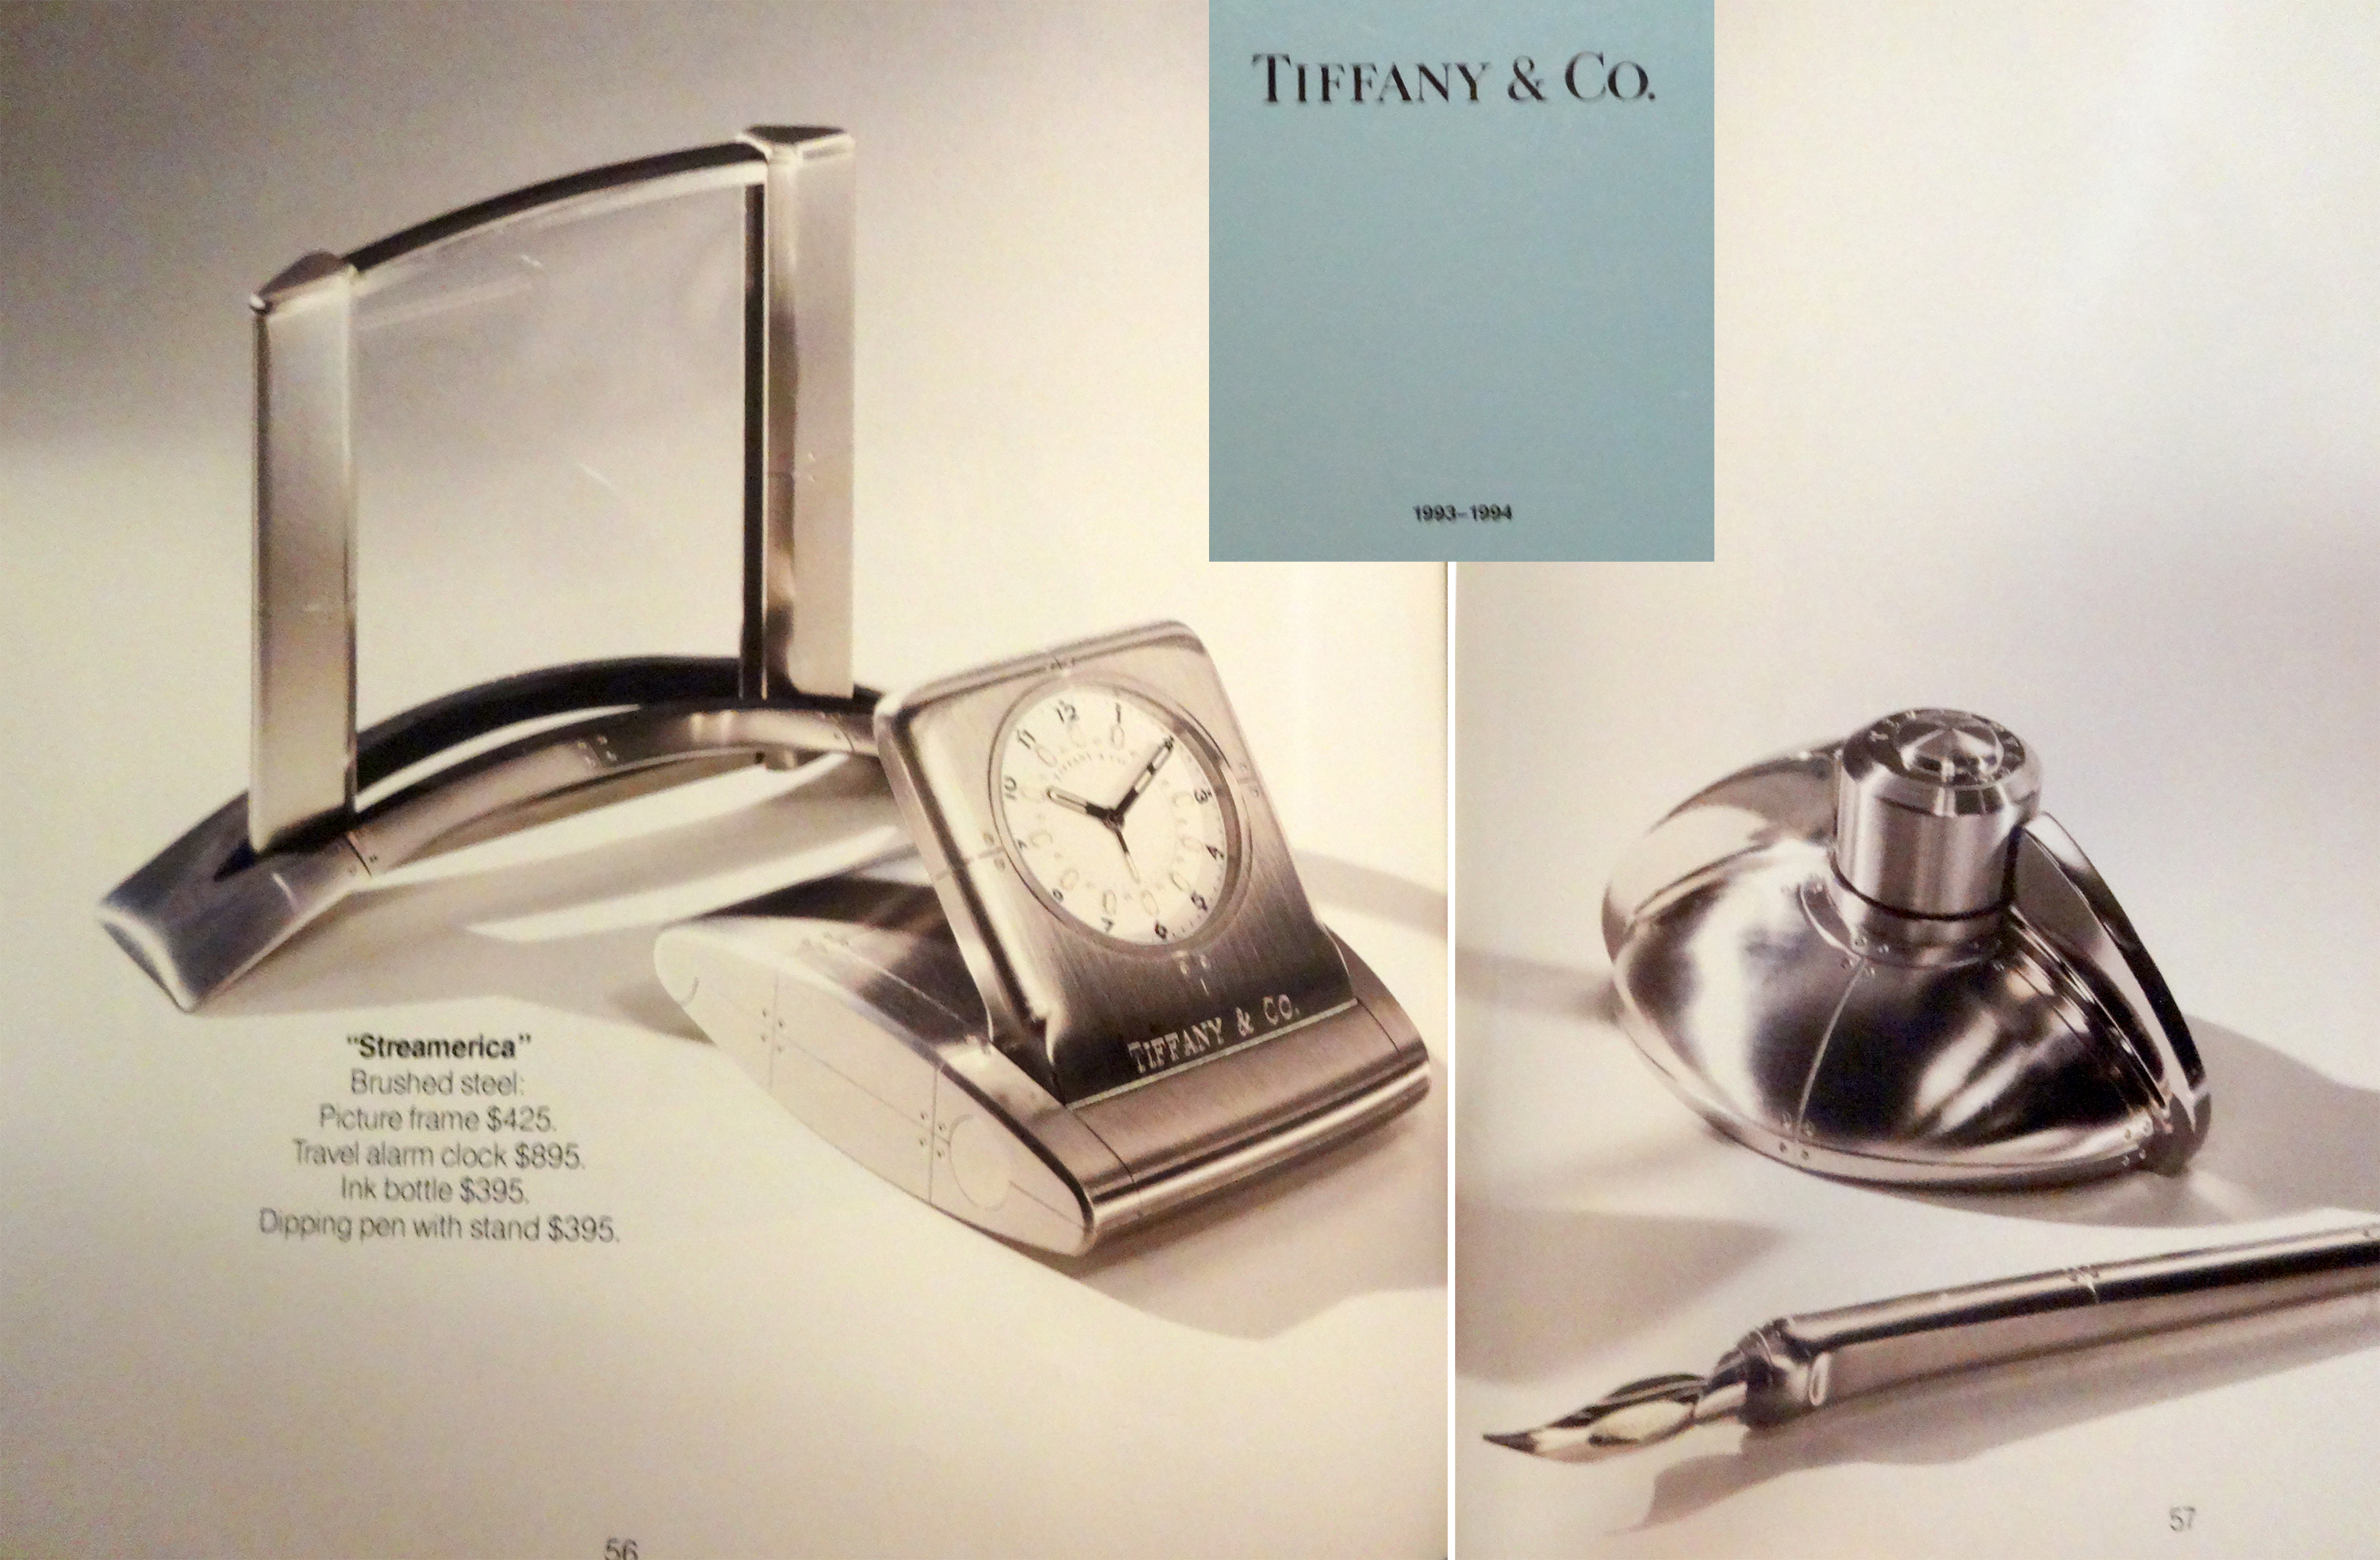 1993 Streamerica Blue Catalog by Tiffany & Co. Tiffany & and Co. Stainless Steel Airframe Medium Picture Frame Metrozone Photo Home Office Collection Desk Airframe Travel alarm Clock Ink Bottle dipping pen airflow 